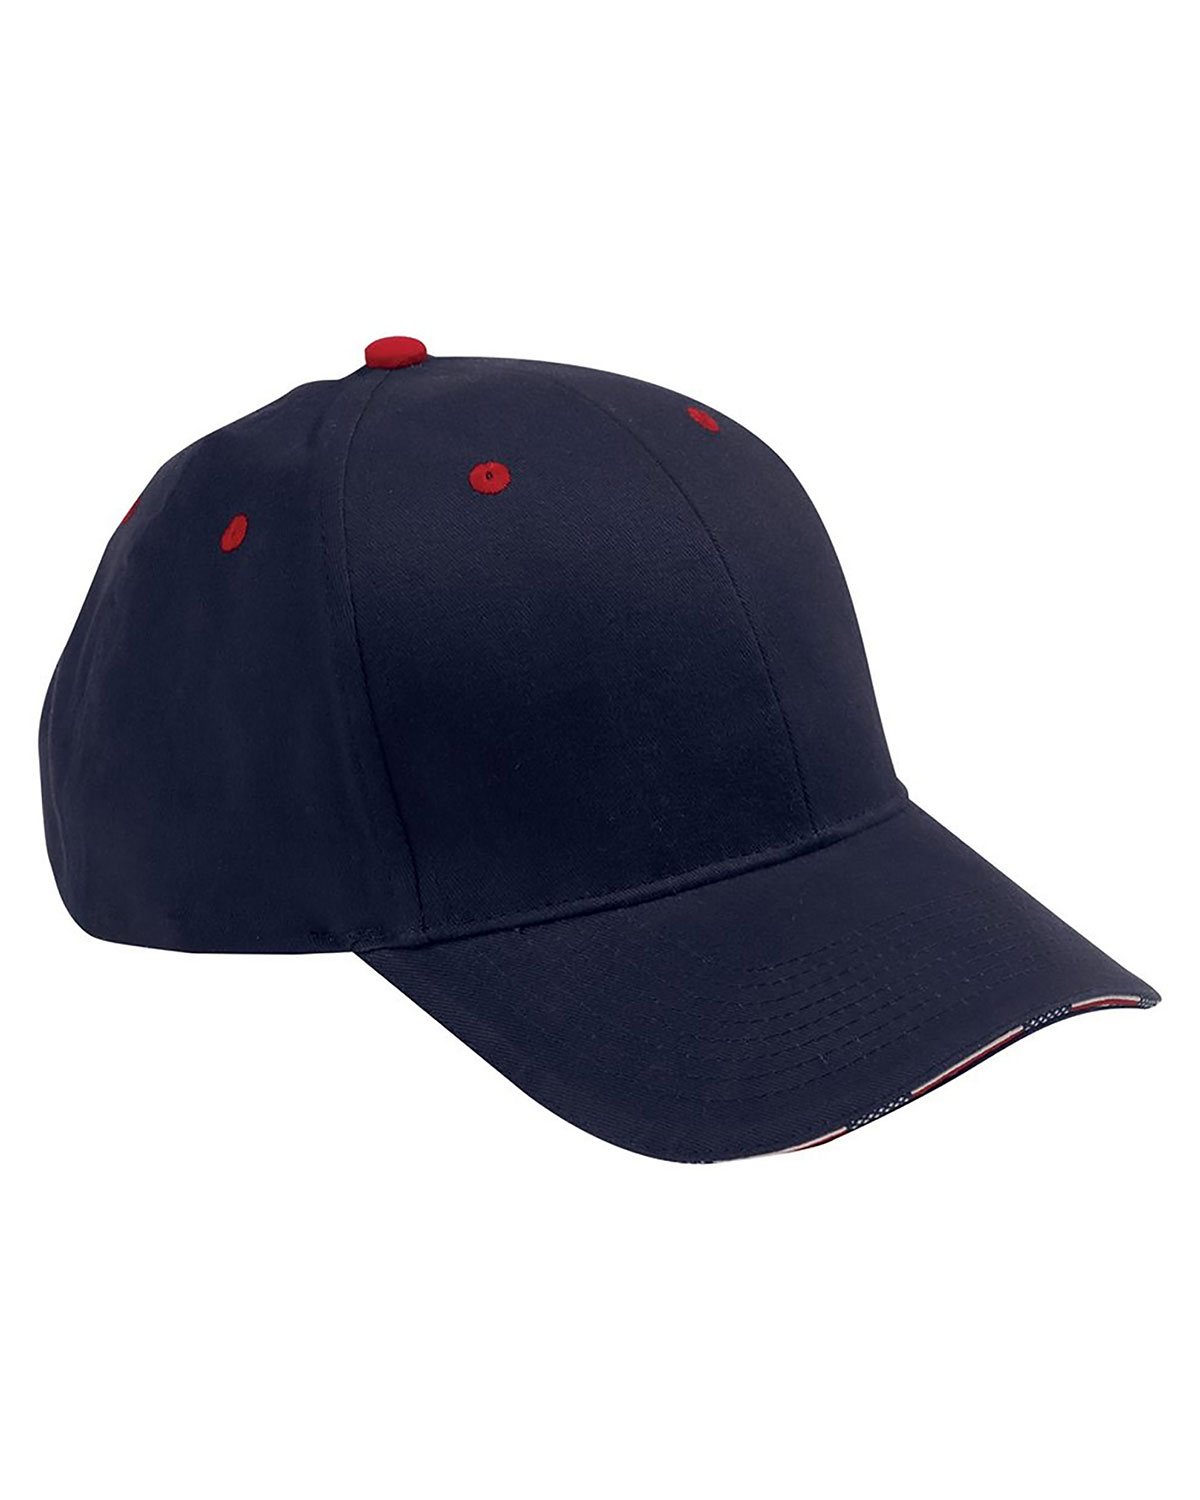 Adams PA102 Men 6-Panel Mid-Profile Structured Stars & Stripes Sandwich Visor With Usa Flag Label at Apparelstation